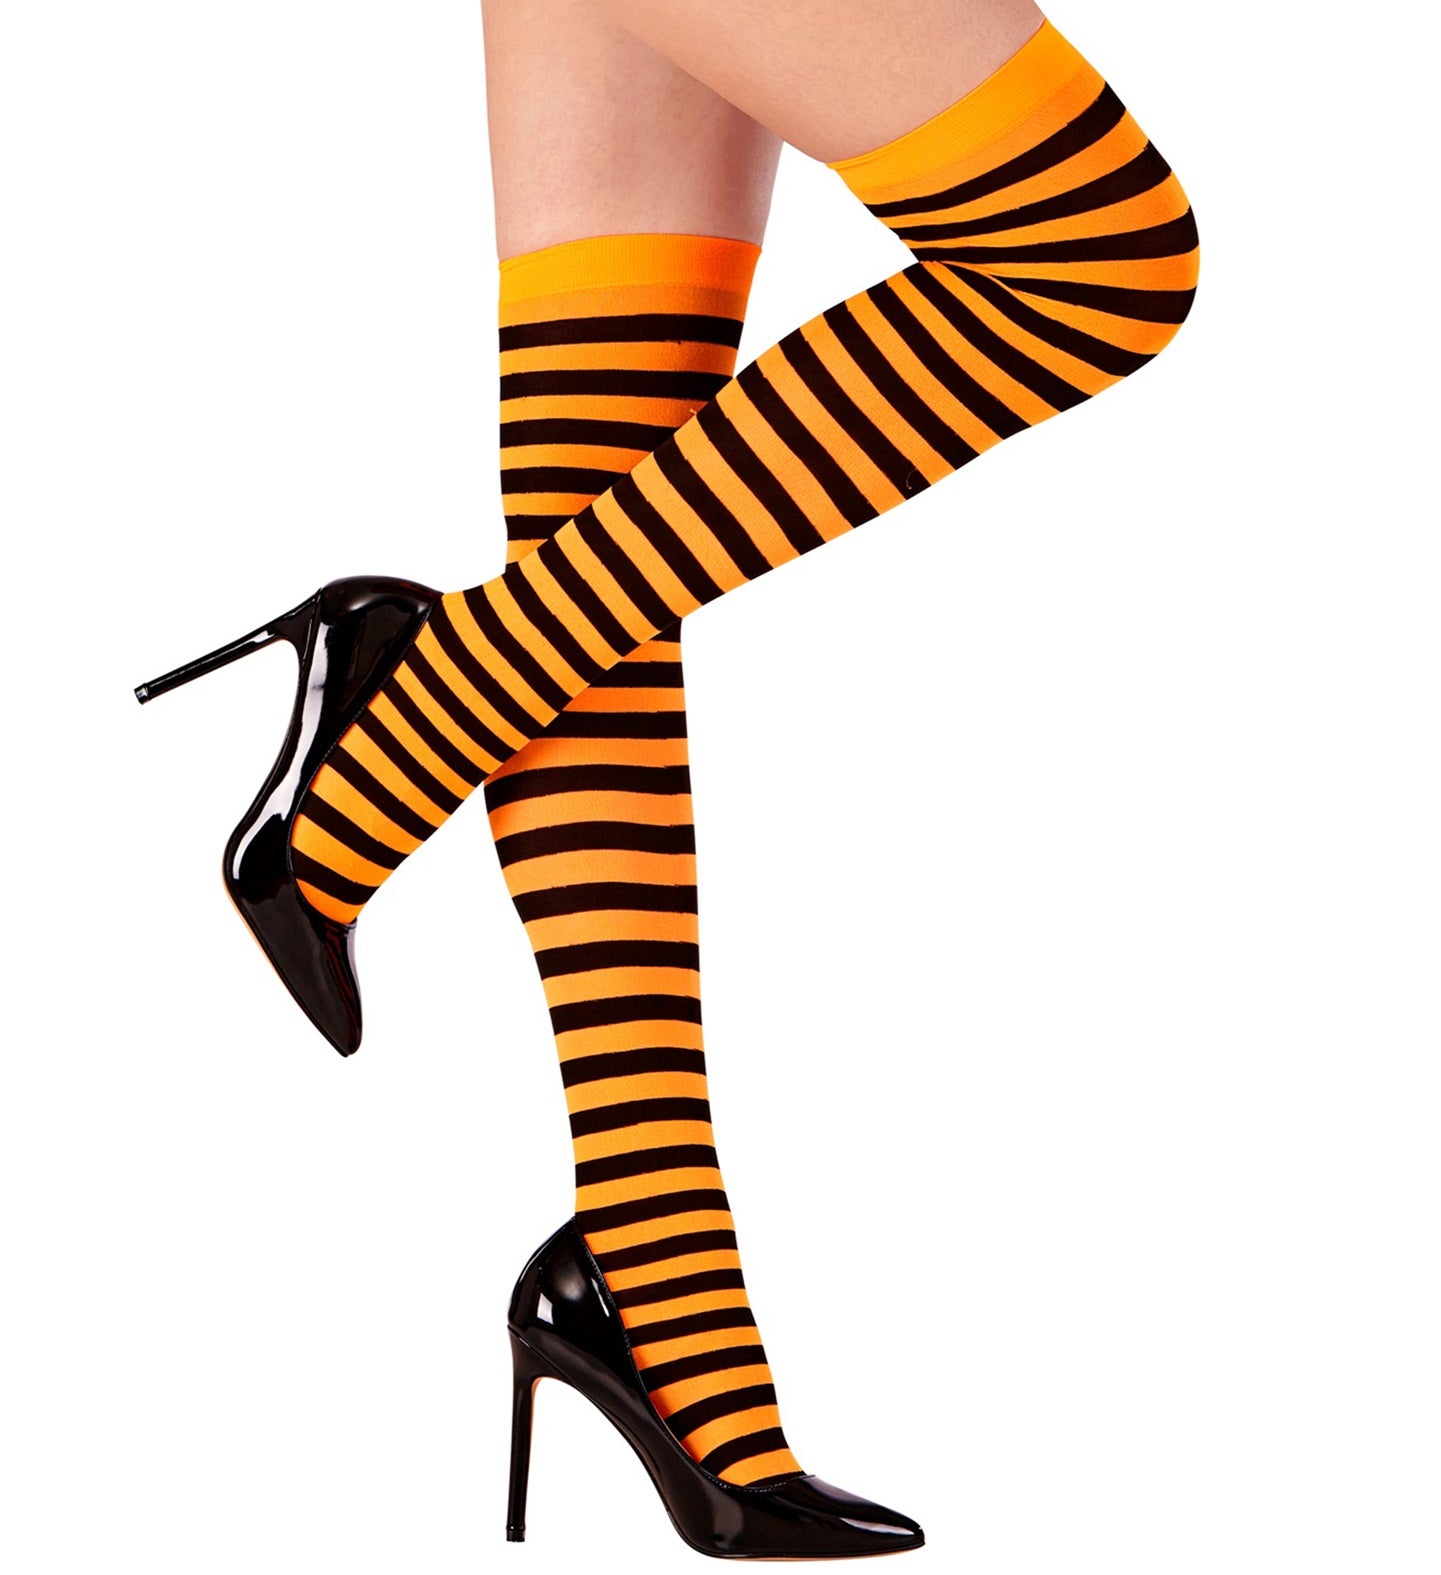 Orange and Black Striped Thigh Highs Stockings